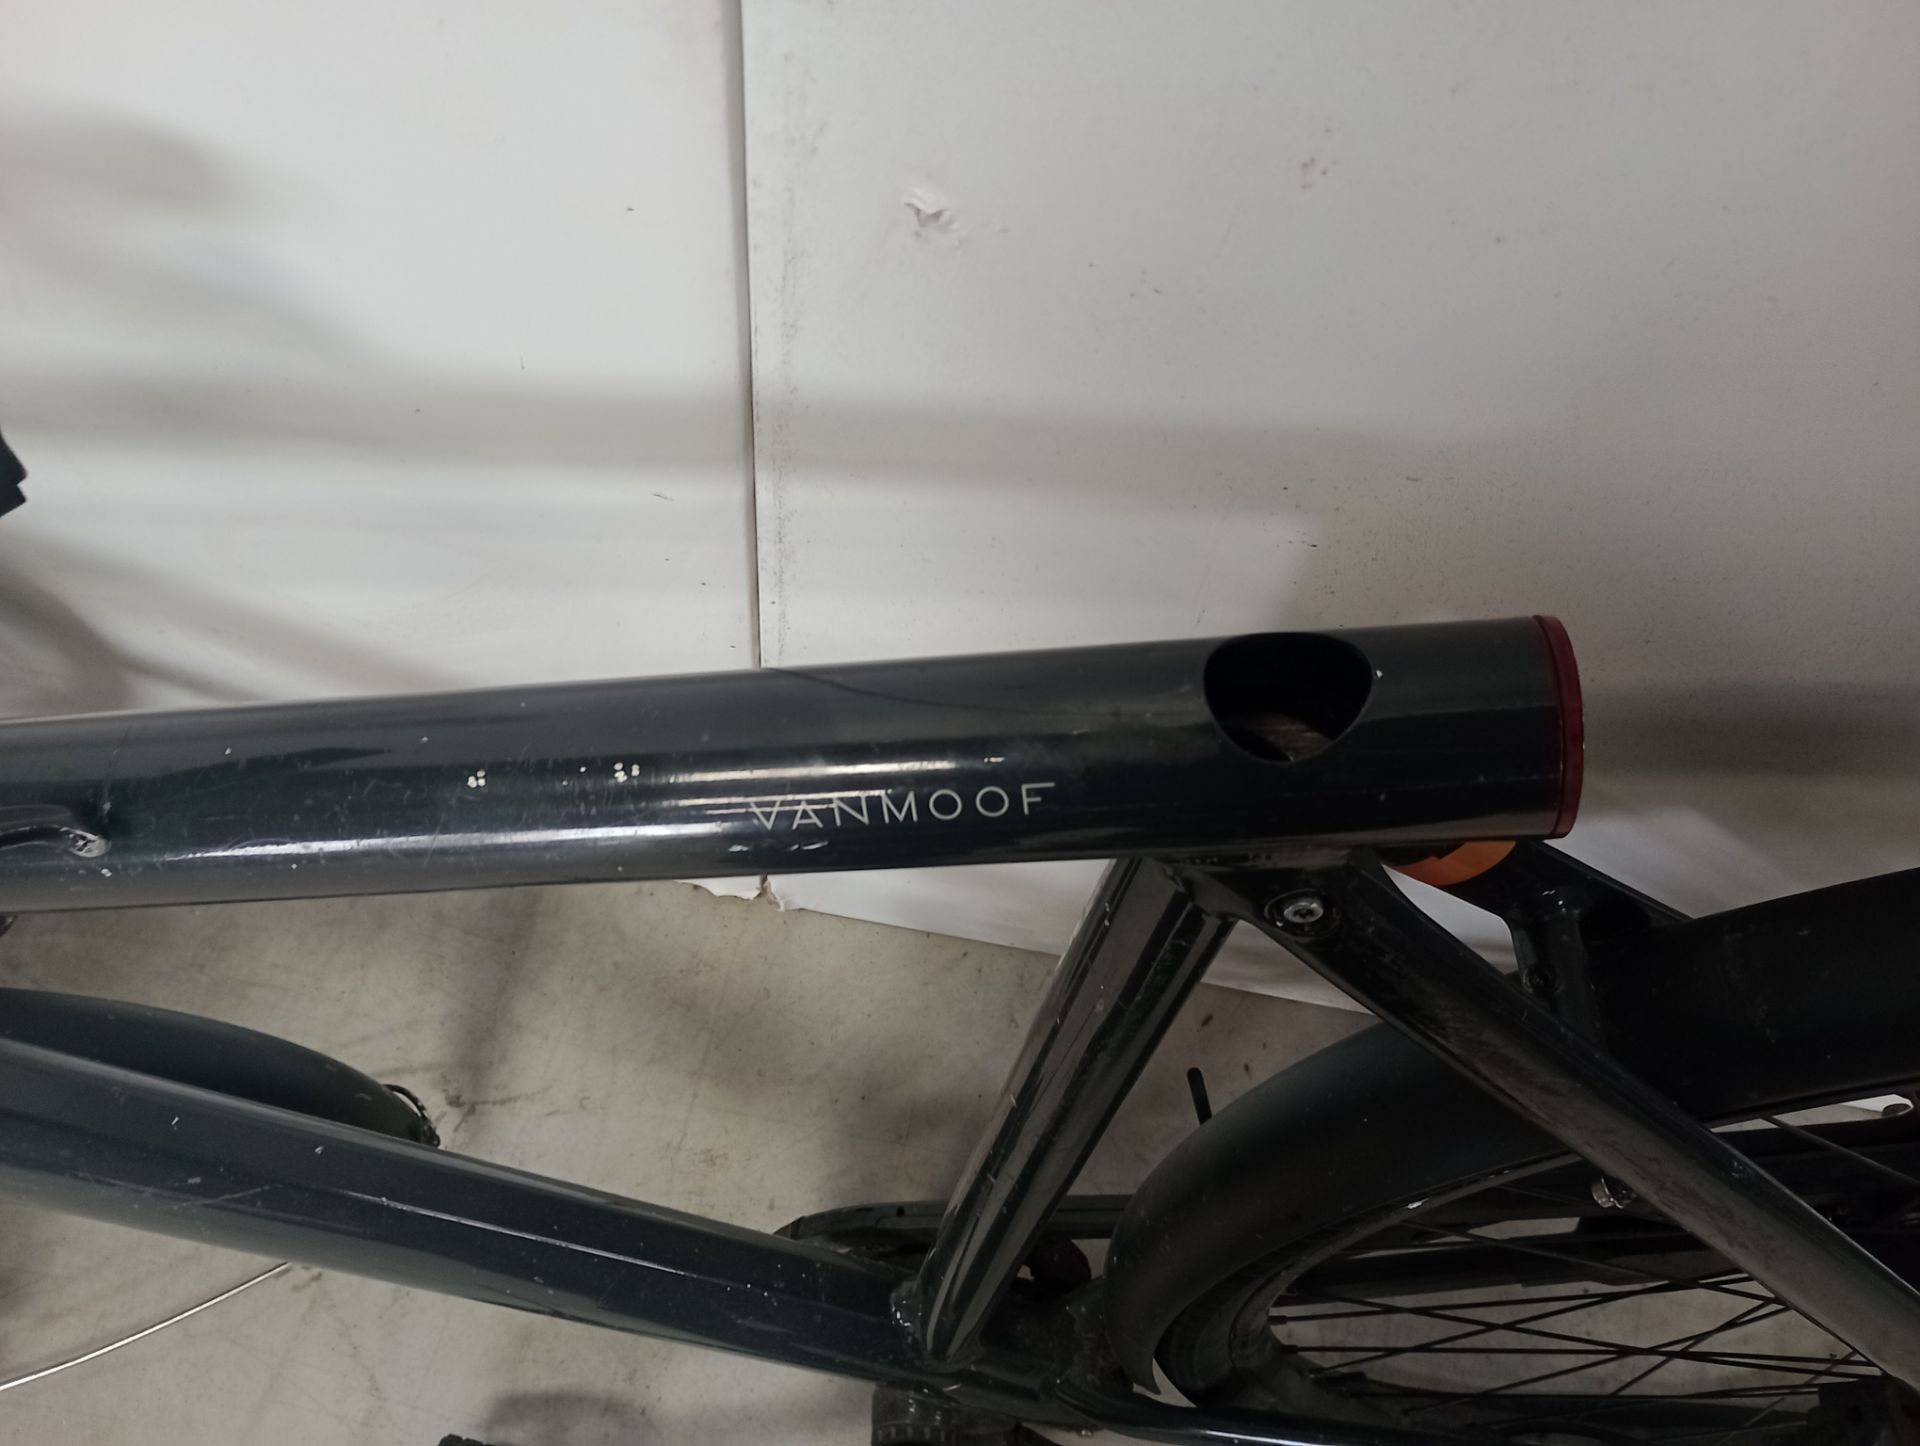 VanMoof S2 Electric Bike, Frame Number AST8808835 (No Seat Post, Saddle or Wheel Nuts) (NOT - Image 2 of 3